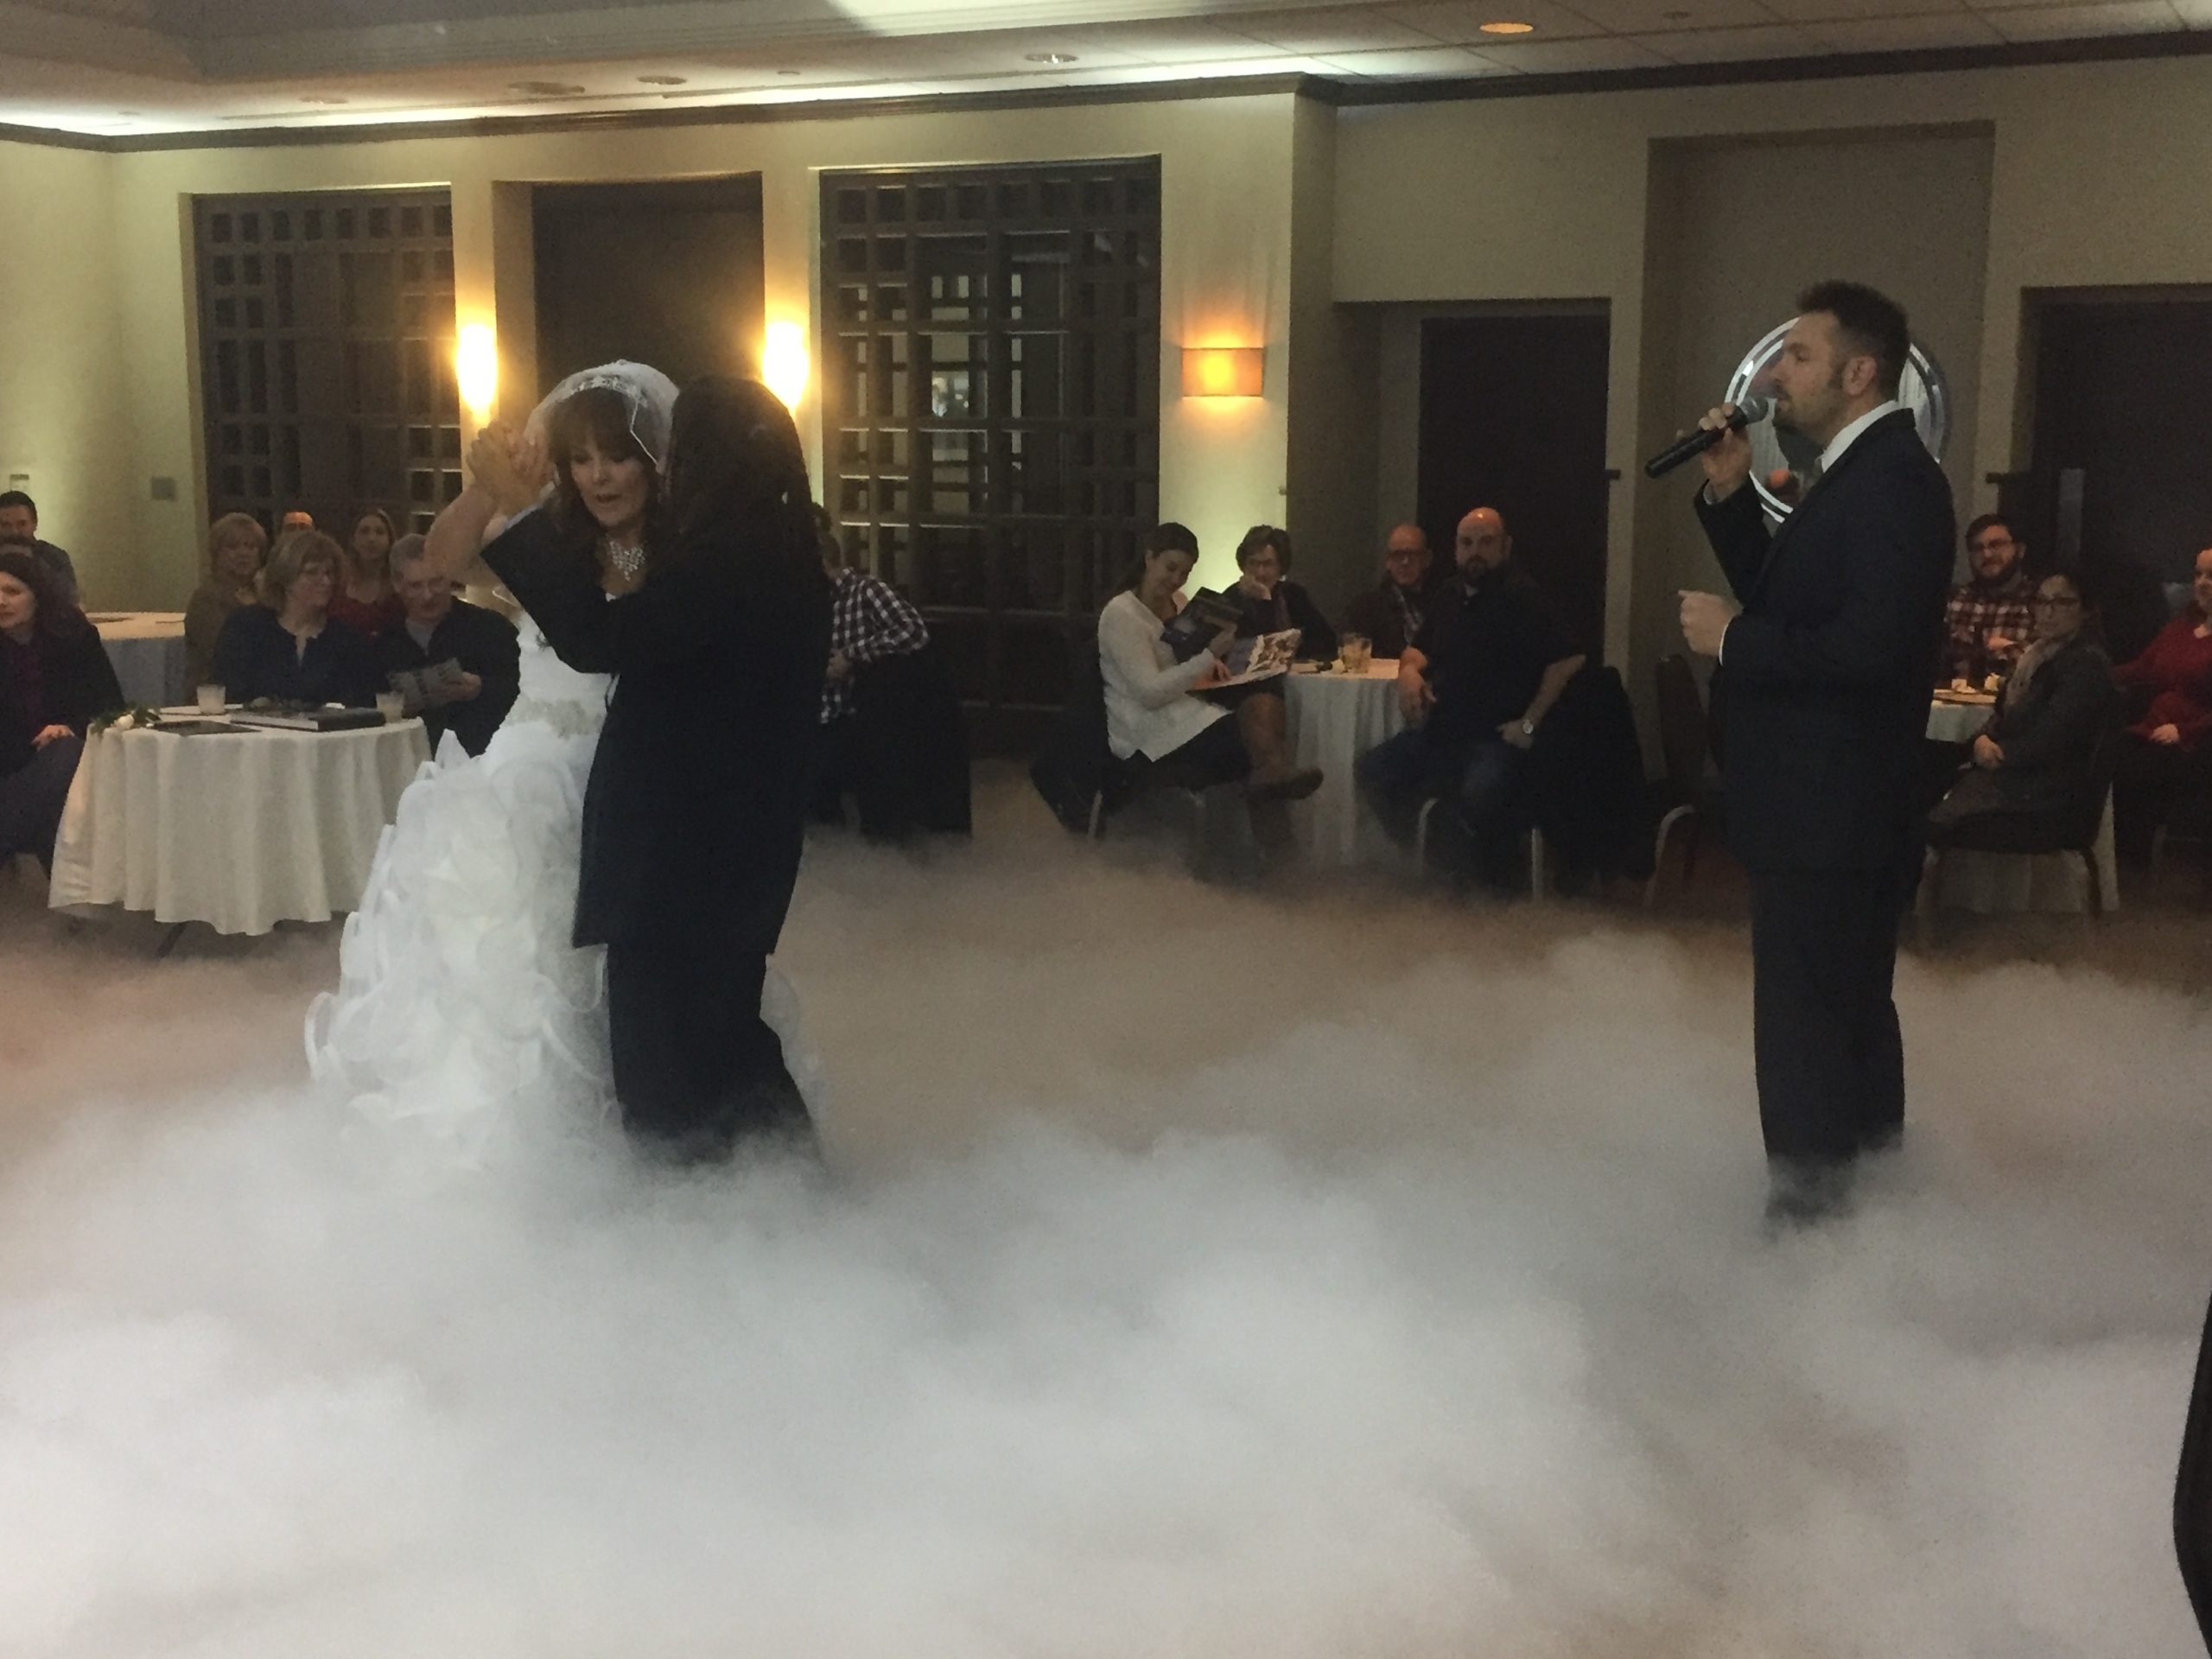 Jay Thomson singing the first dance while our bride and groom dance on the clouds